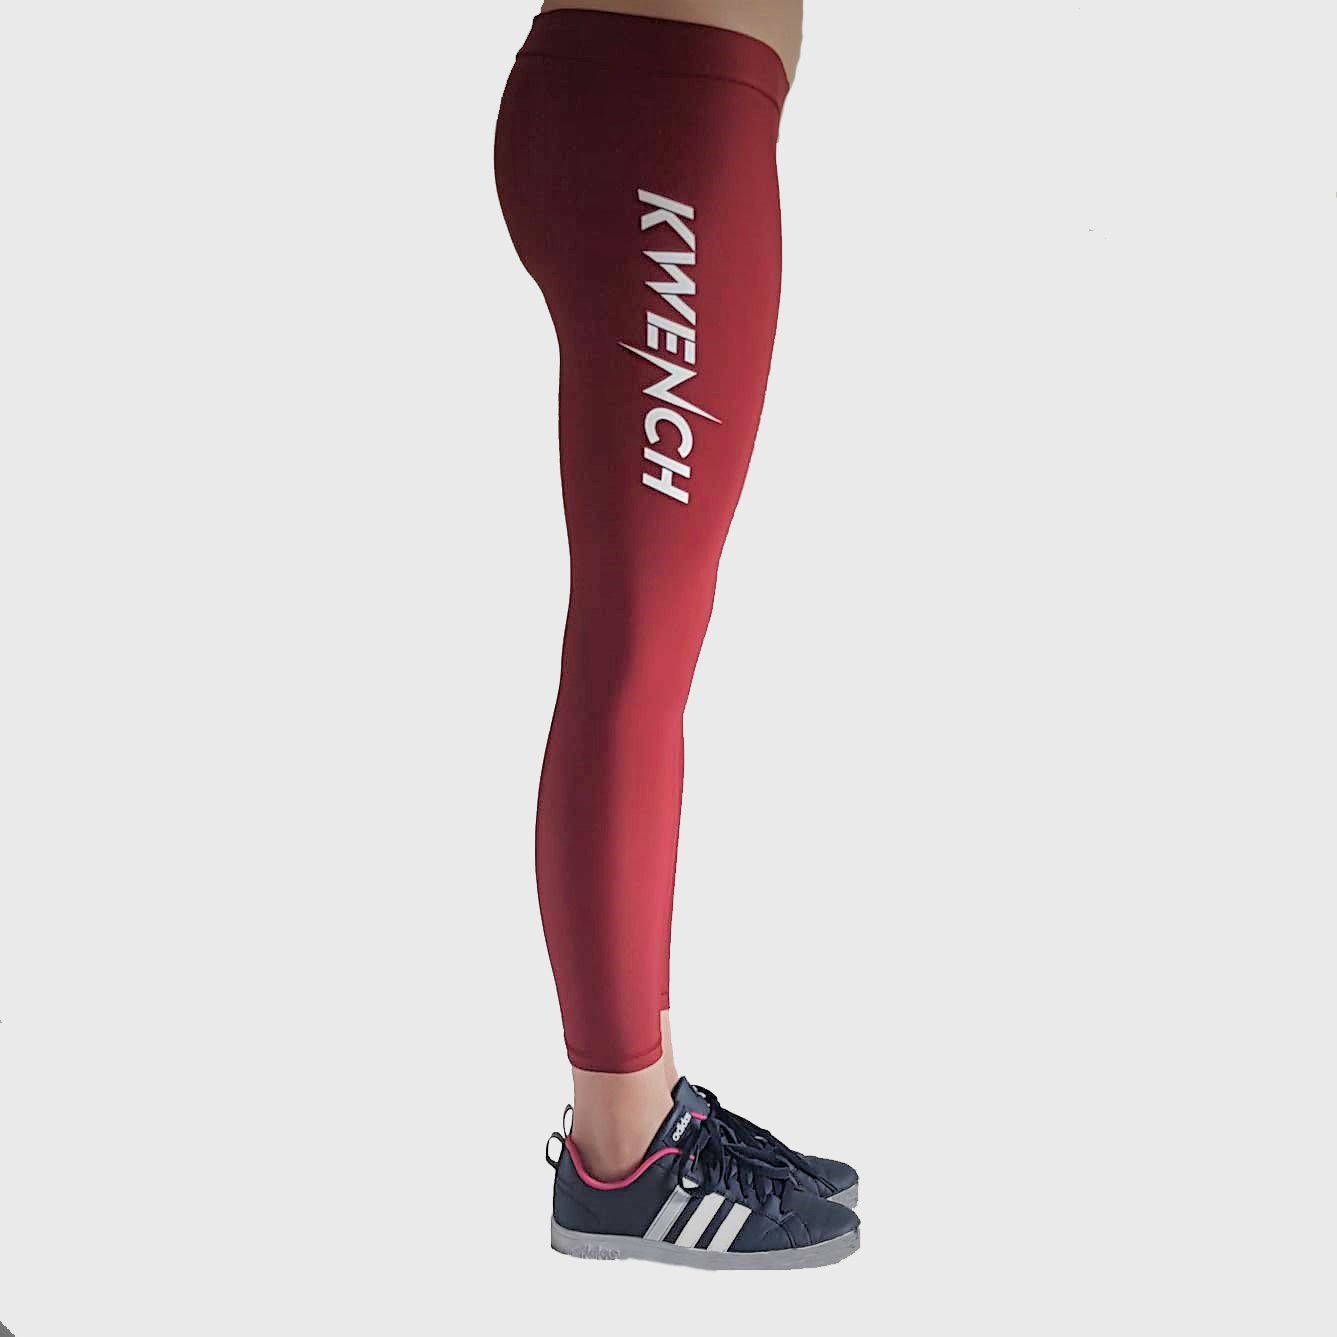 Ombre Seamless Yoga Seamless Workout Leggings And Pants Set Womens Gym  Outfits With Long Sleeves, Crop Top, And Athletic Wear For Workout And  Fitness From Greatshare, $19.99 | DHgate.Com